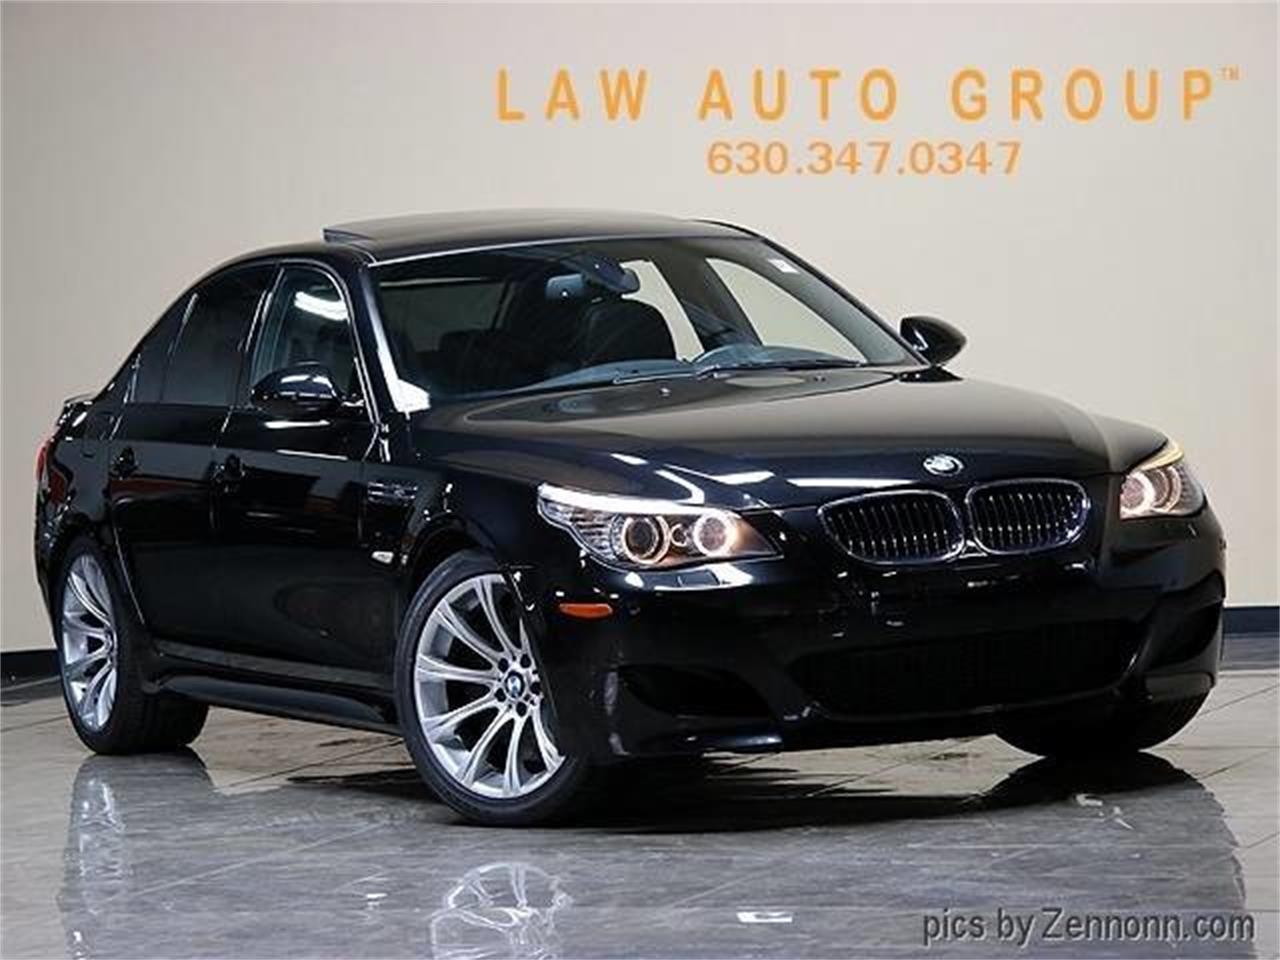 Used 2009 BMW M5 for Sale in Charlotte, NC (with Photos) - CarGurus